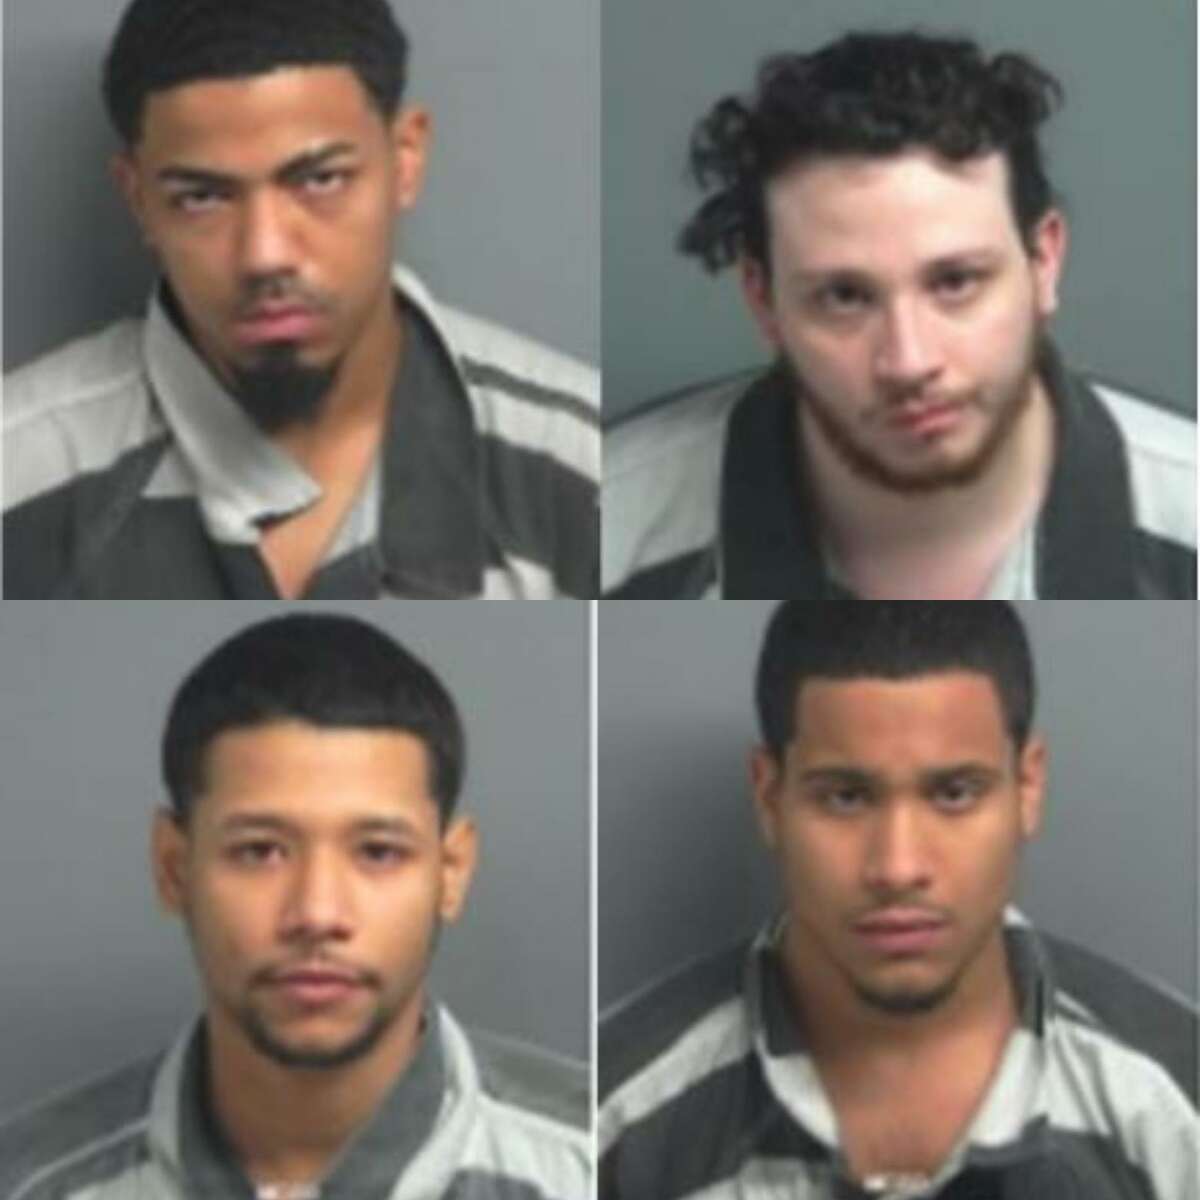 Jonathan Rafael Pequero, 22, Christopher Andrew Perdikakis, 24, Giobanni Jose Cruz, 23, David Dimitri Figueroa, 21, all from New York City, are being charged with engaging in organized criminal activity, a second-degree felony.